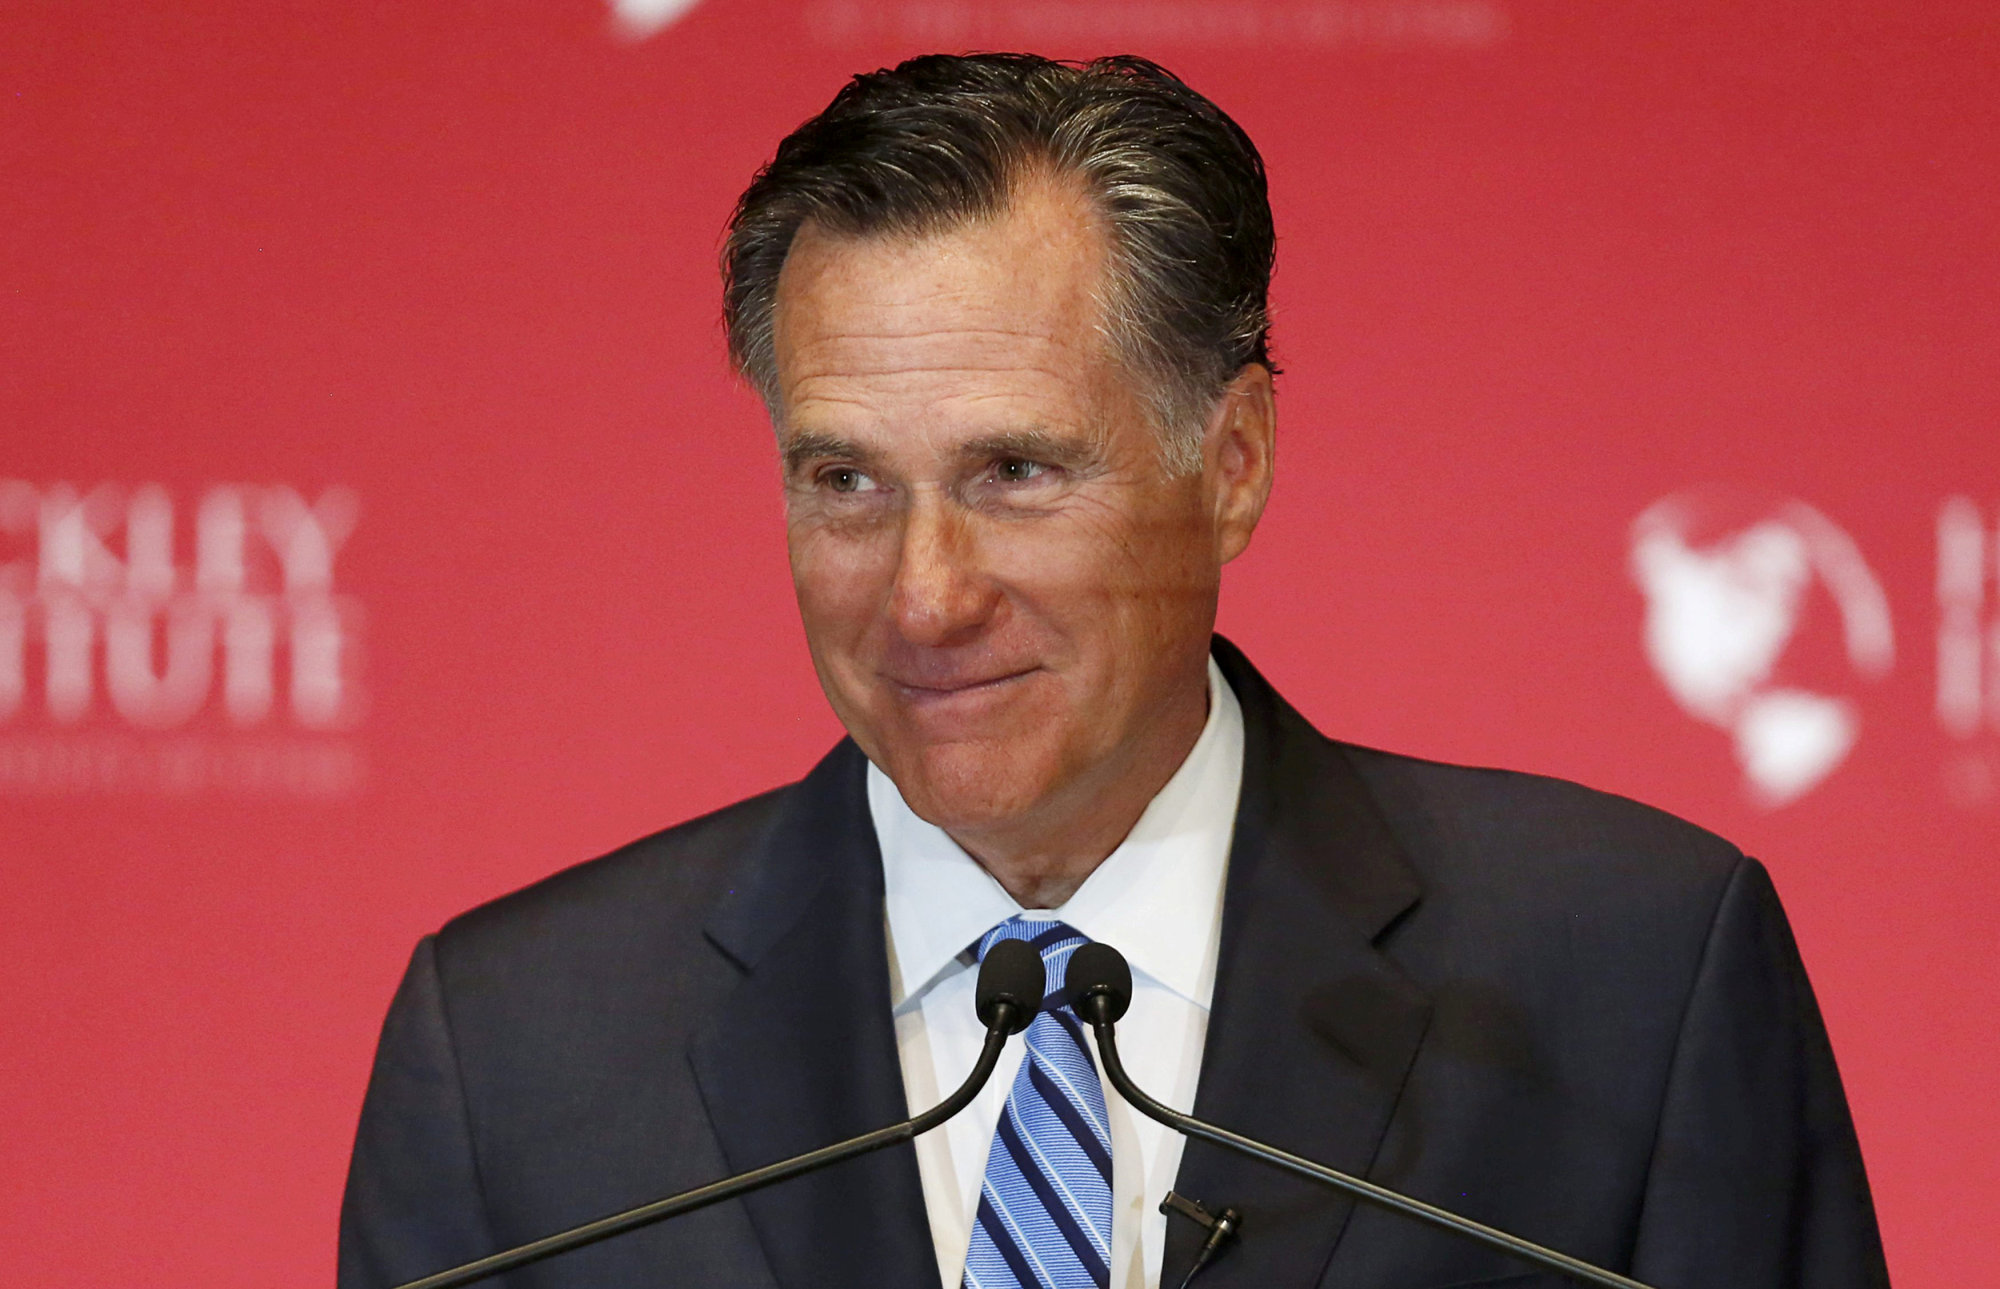 13-facts-about-mitt-romney